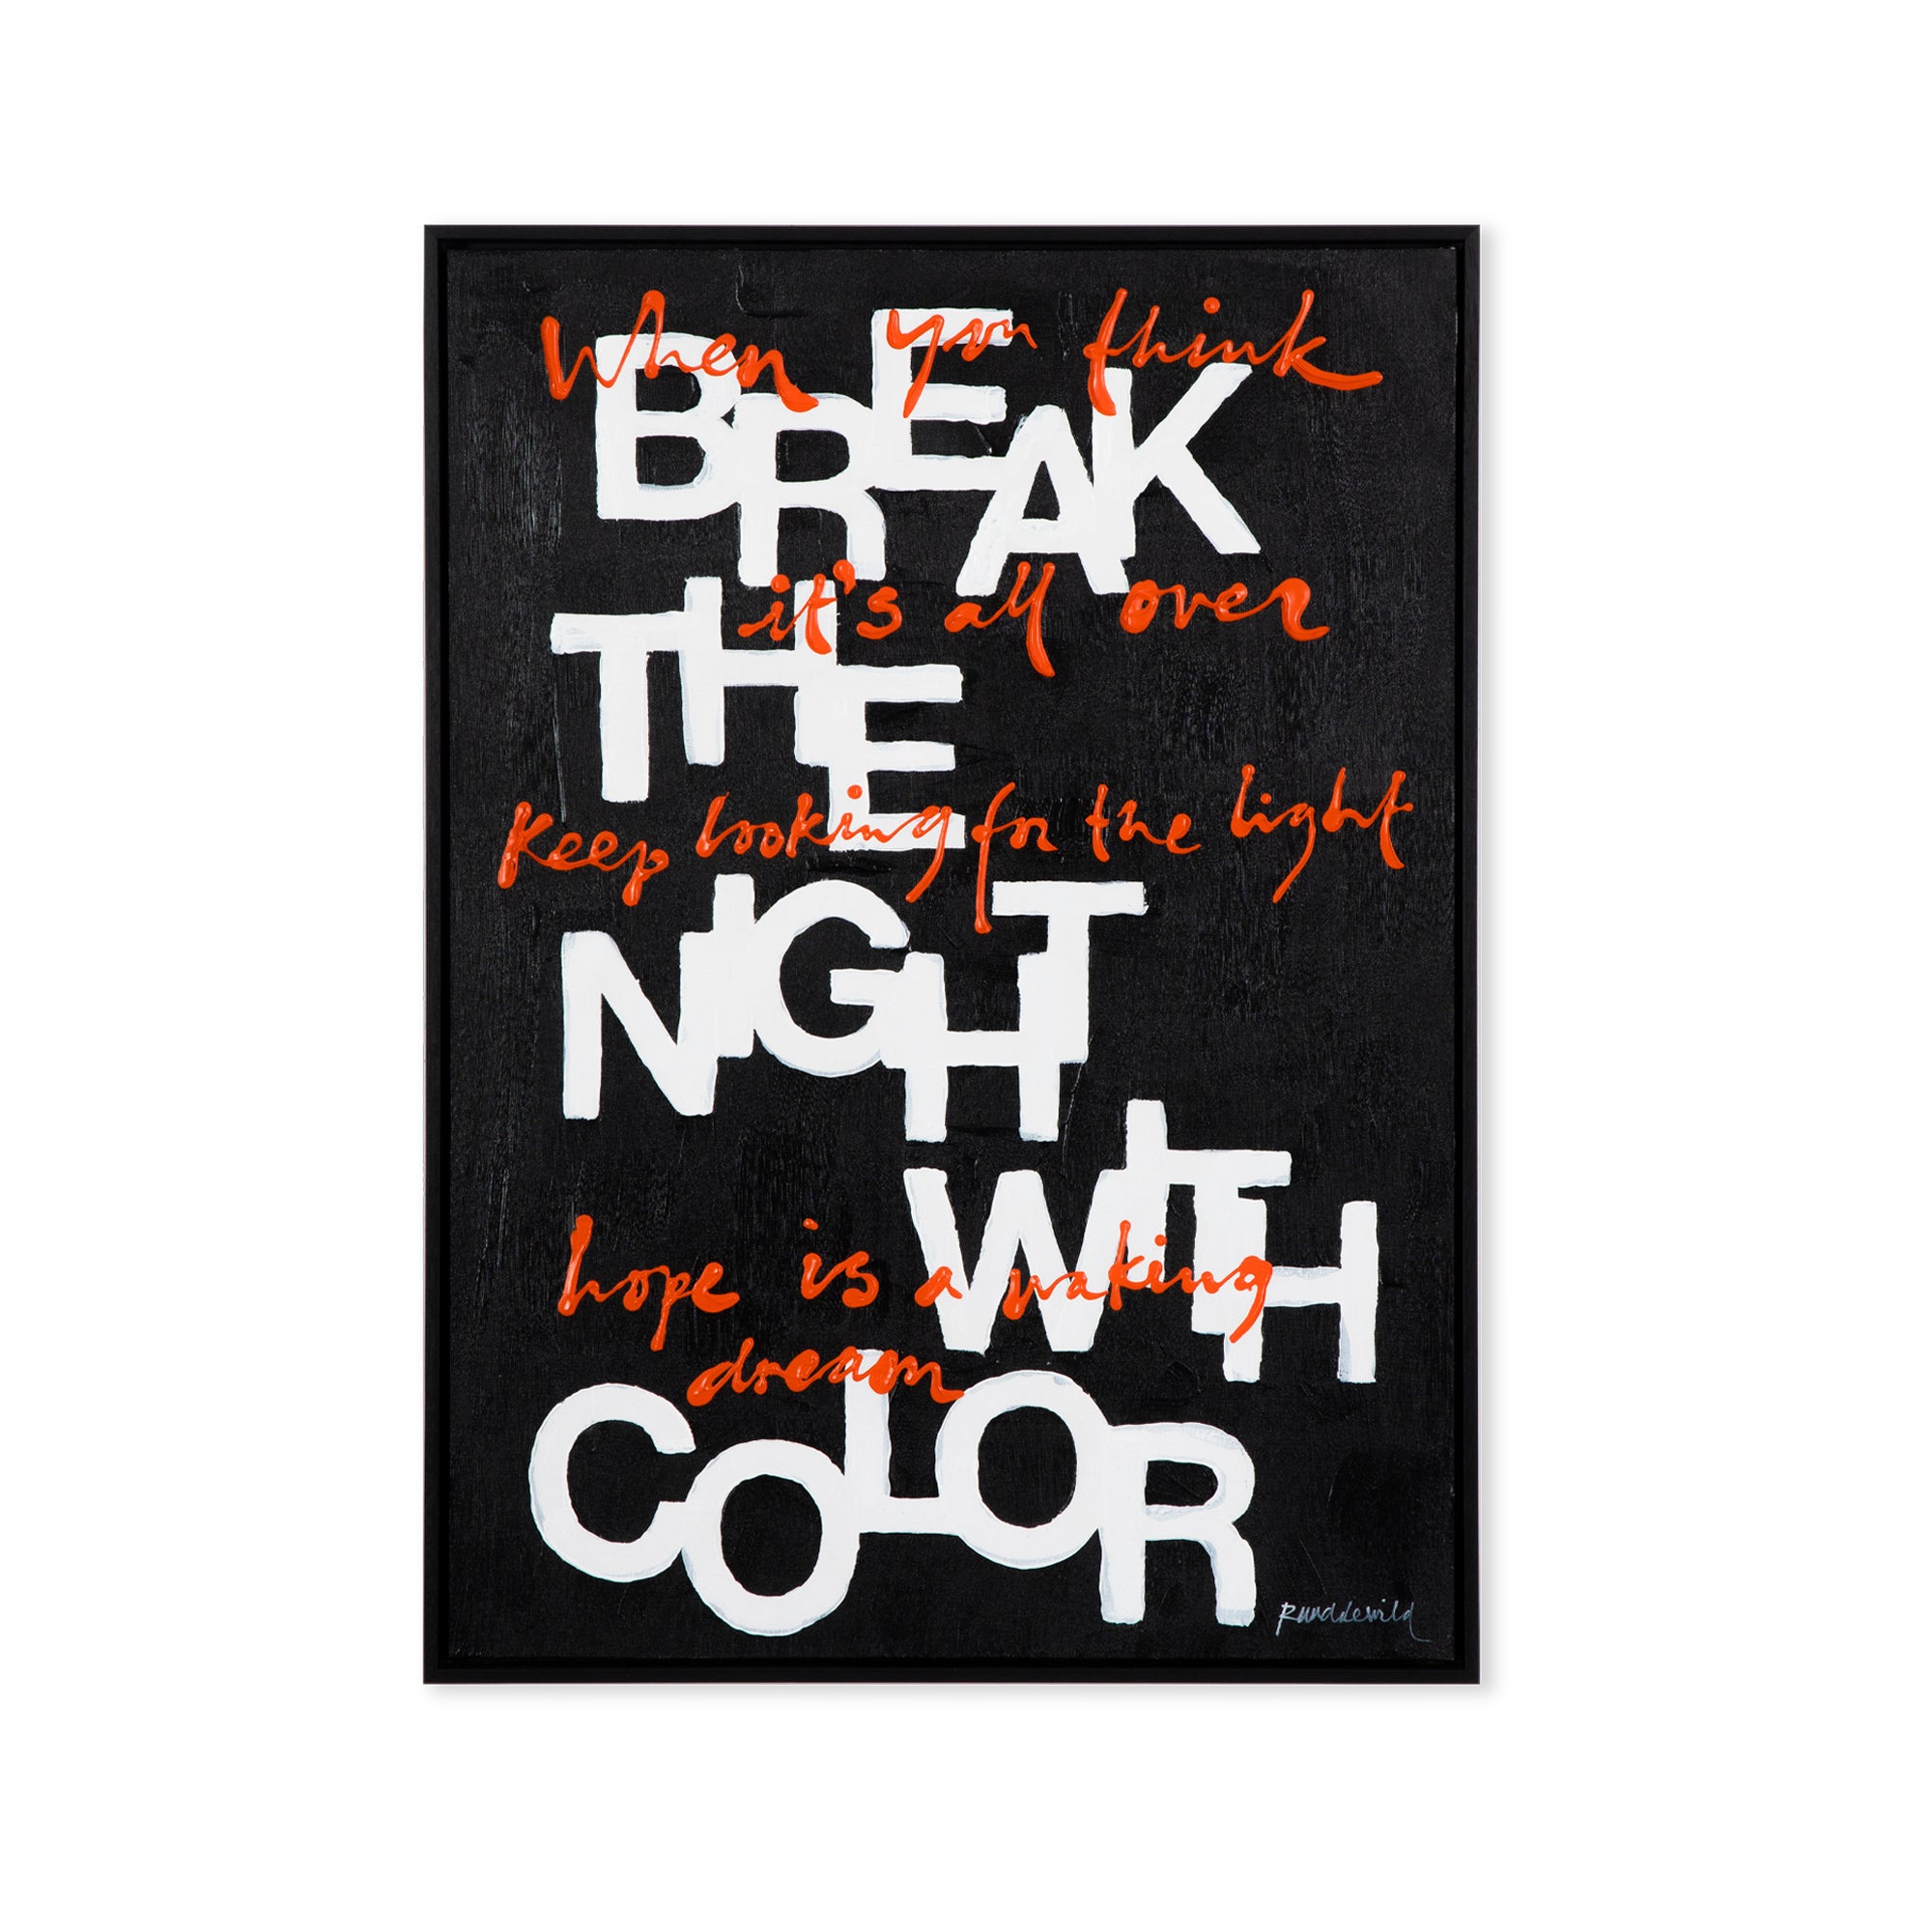 Break the night with color